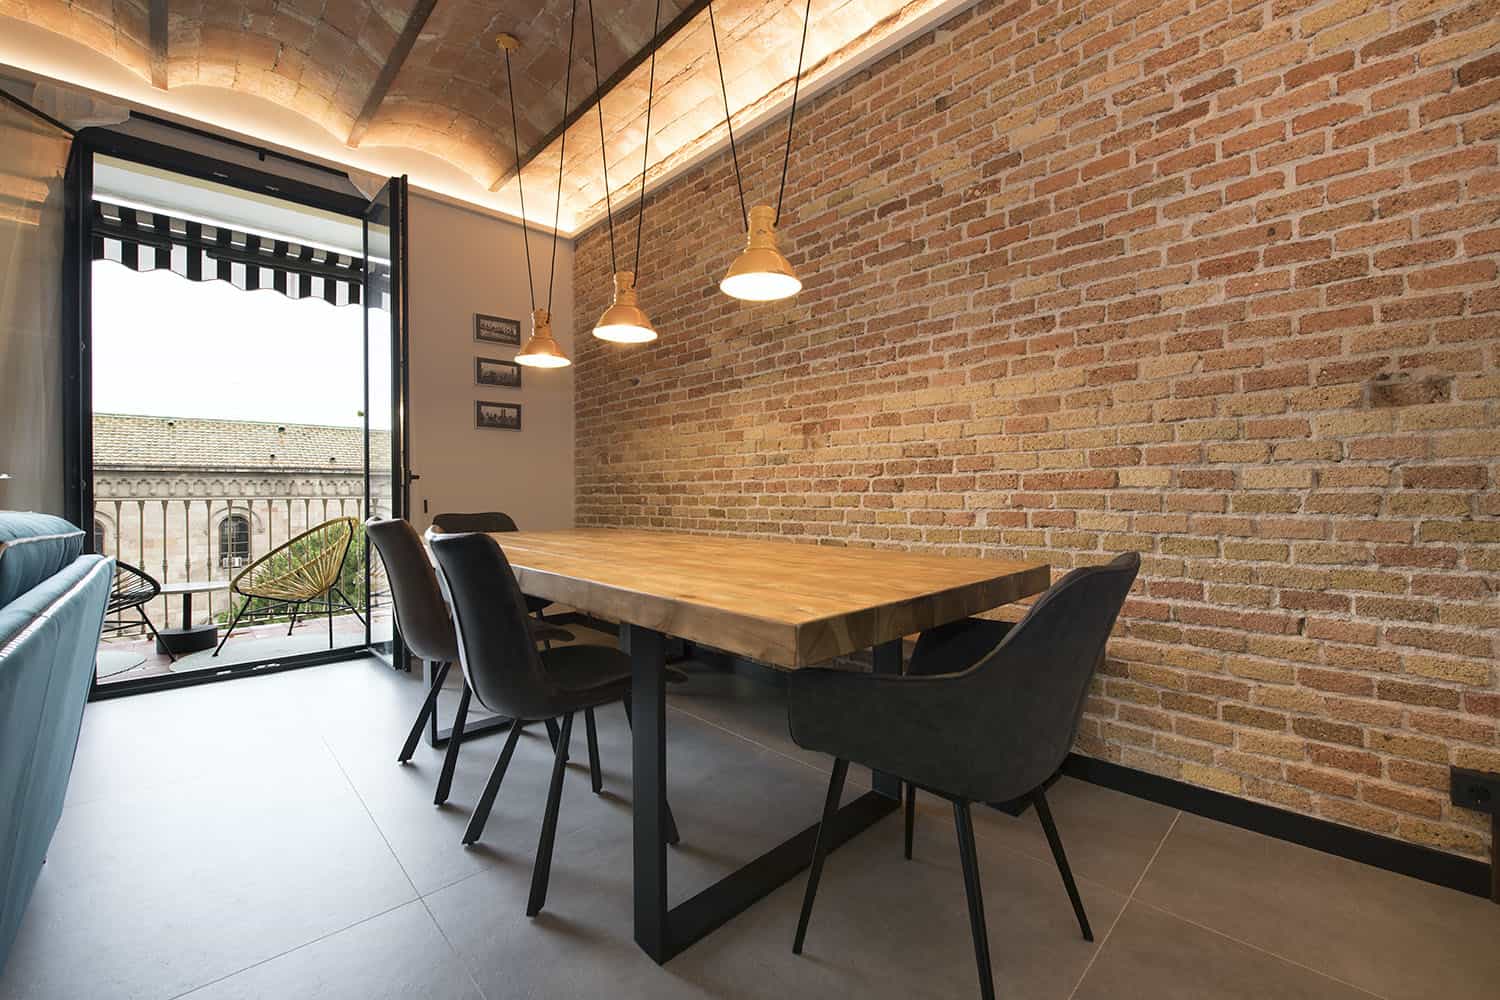 The dining space is industrial, with a brick wall, a wooden table and black chairs plus pendant lamps